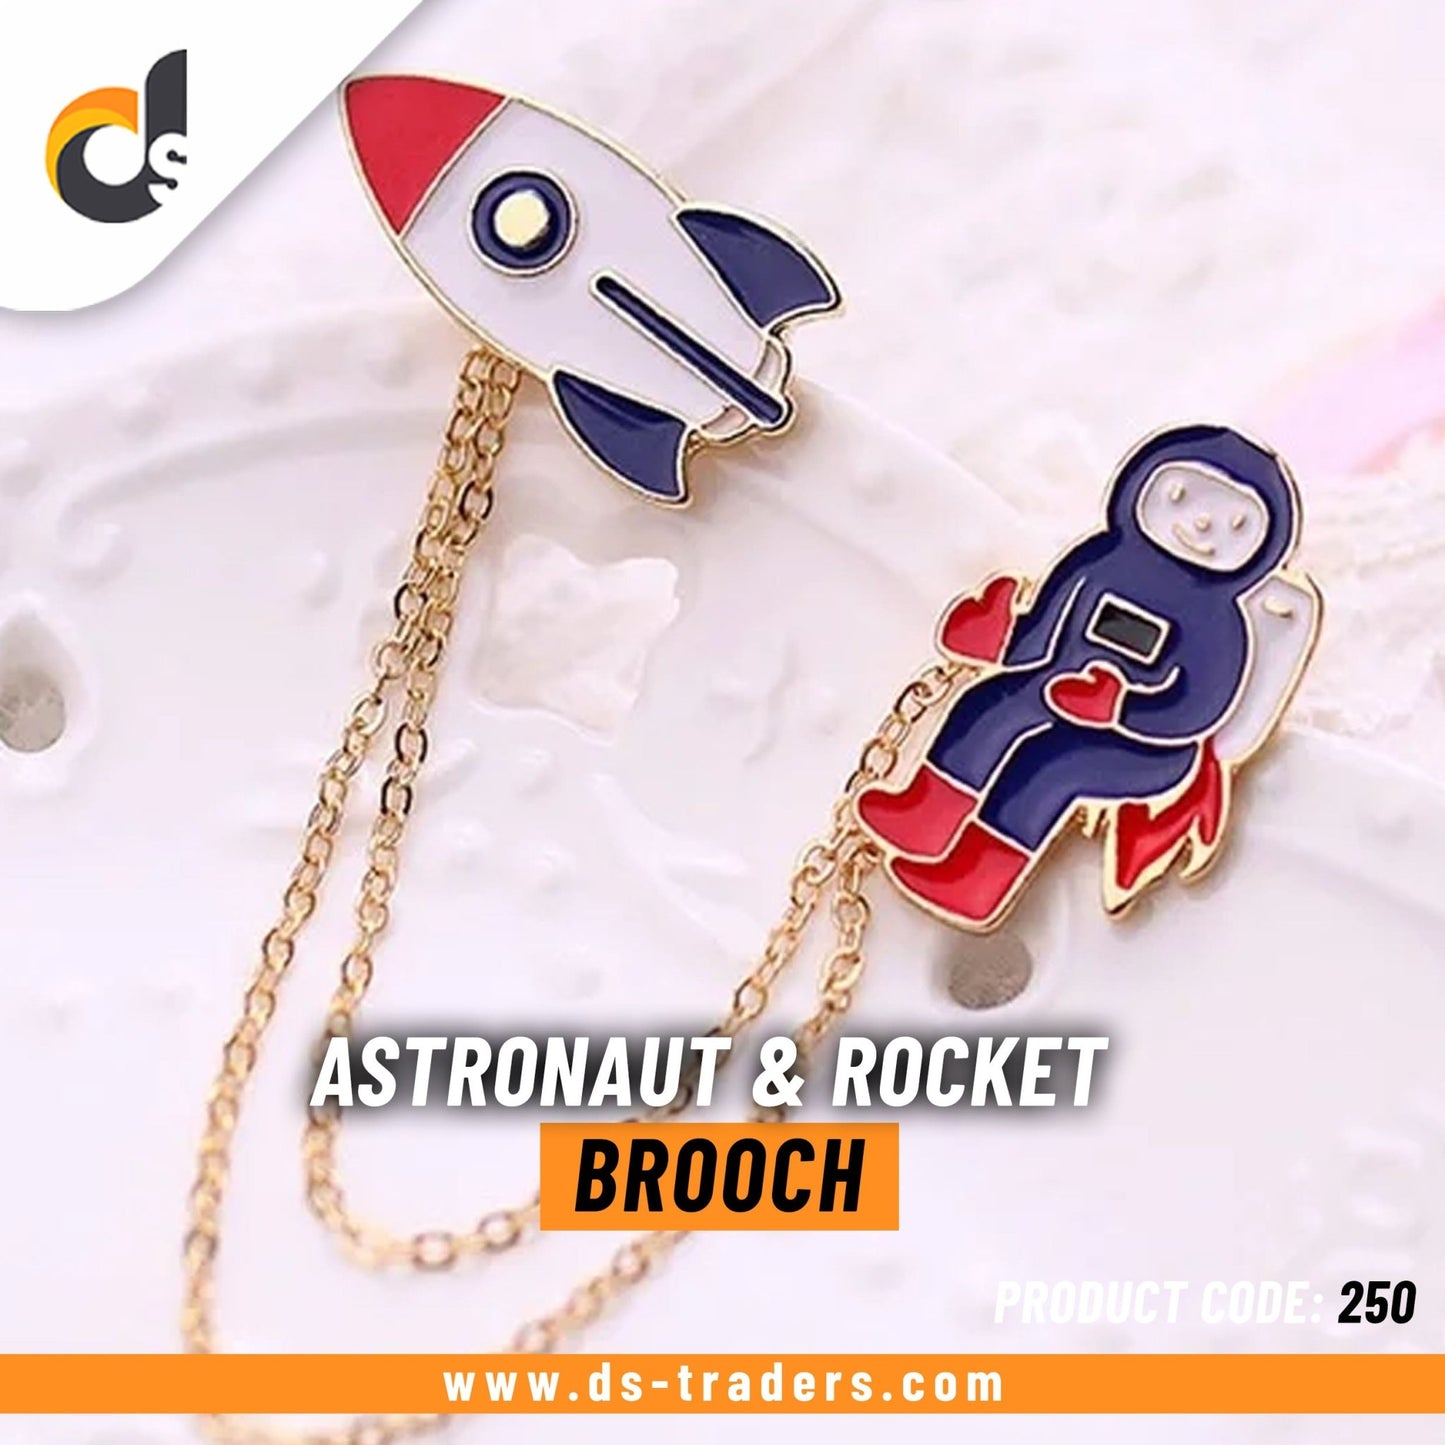 Astronaut & Rocket Chain Brooch - DS Traders